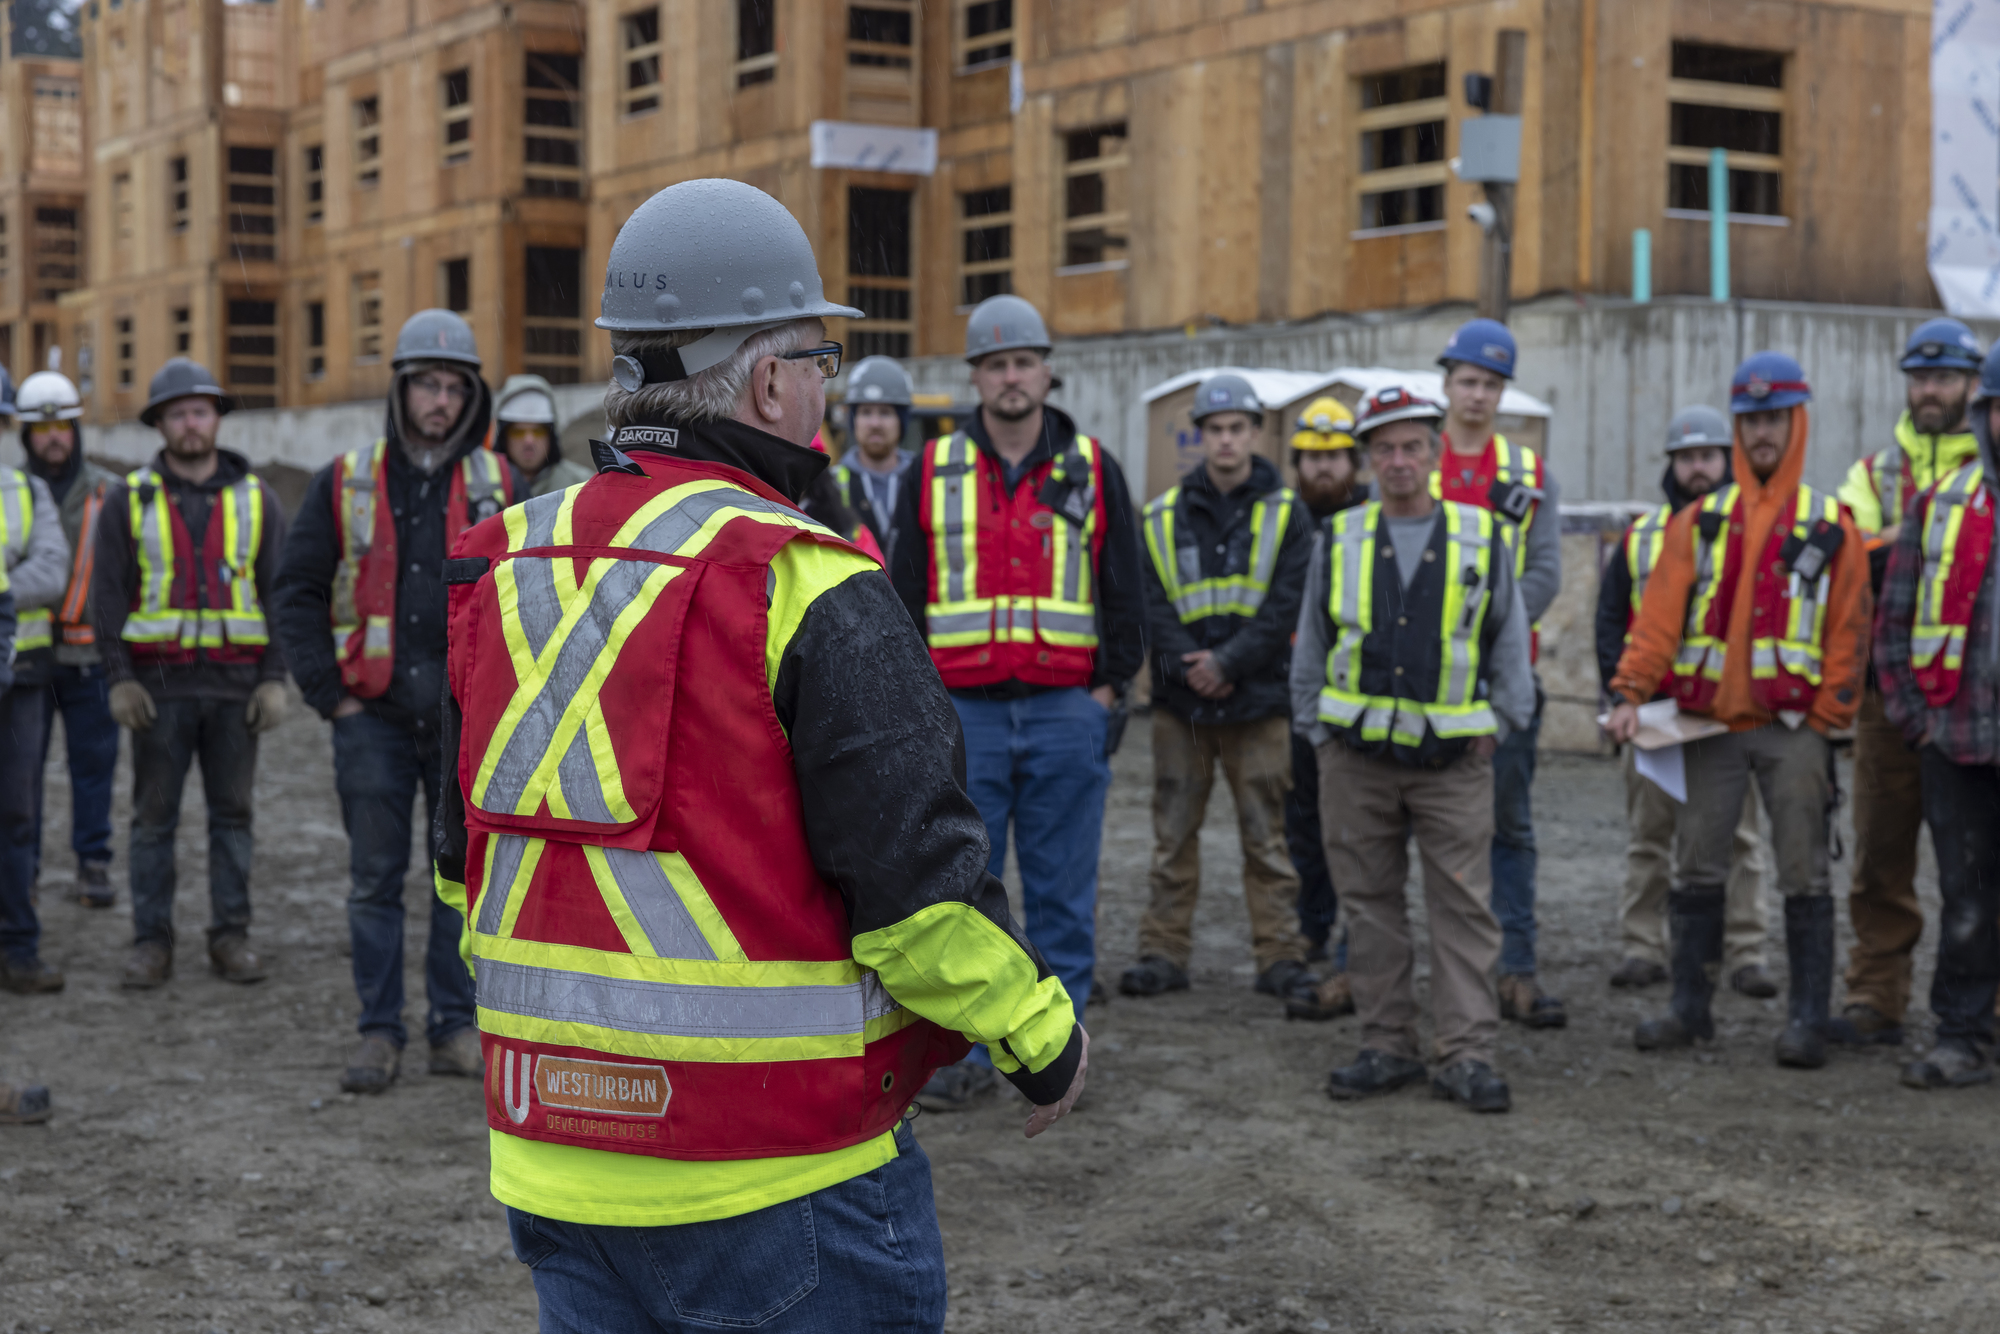 Construction lead speaking to group of construction workers on site.